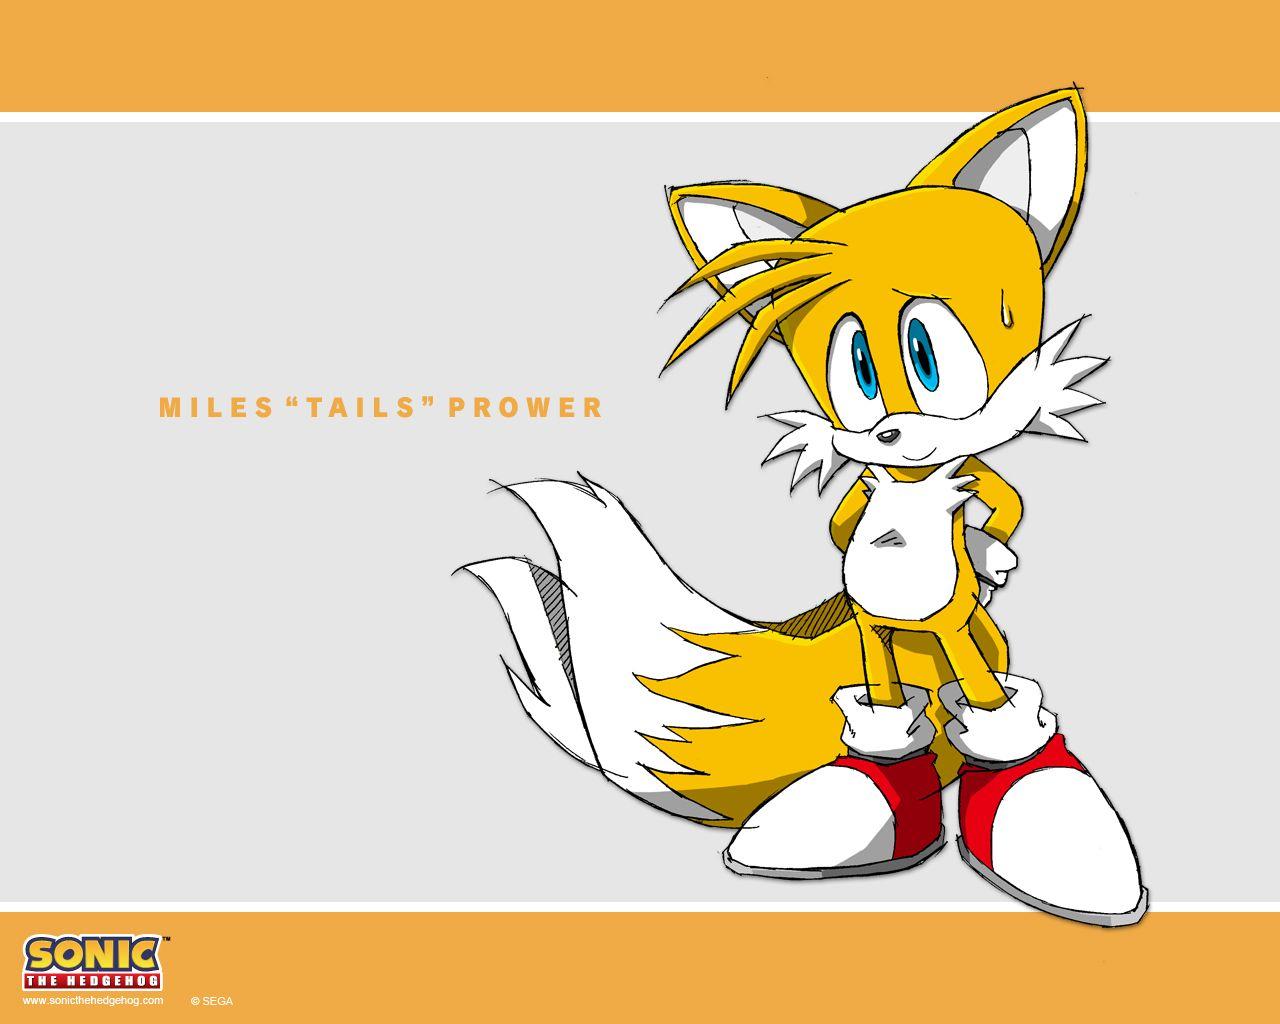 Tails8 by httpswwwdeviantartcommontyth on DeviantArt Tails cute  beautiful cutest fan art miles tails prower miles p  Sonic art Hero  wallpaper Sonic